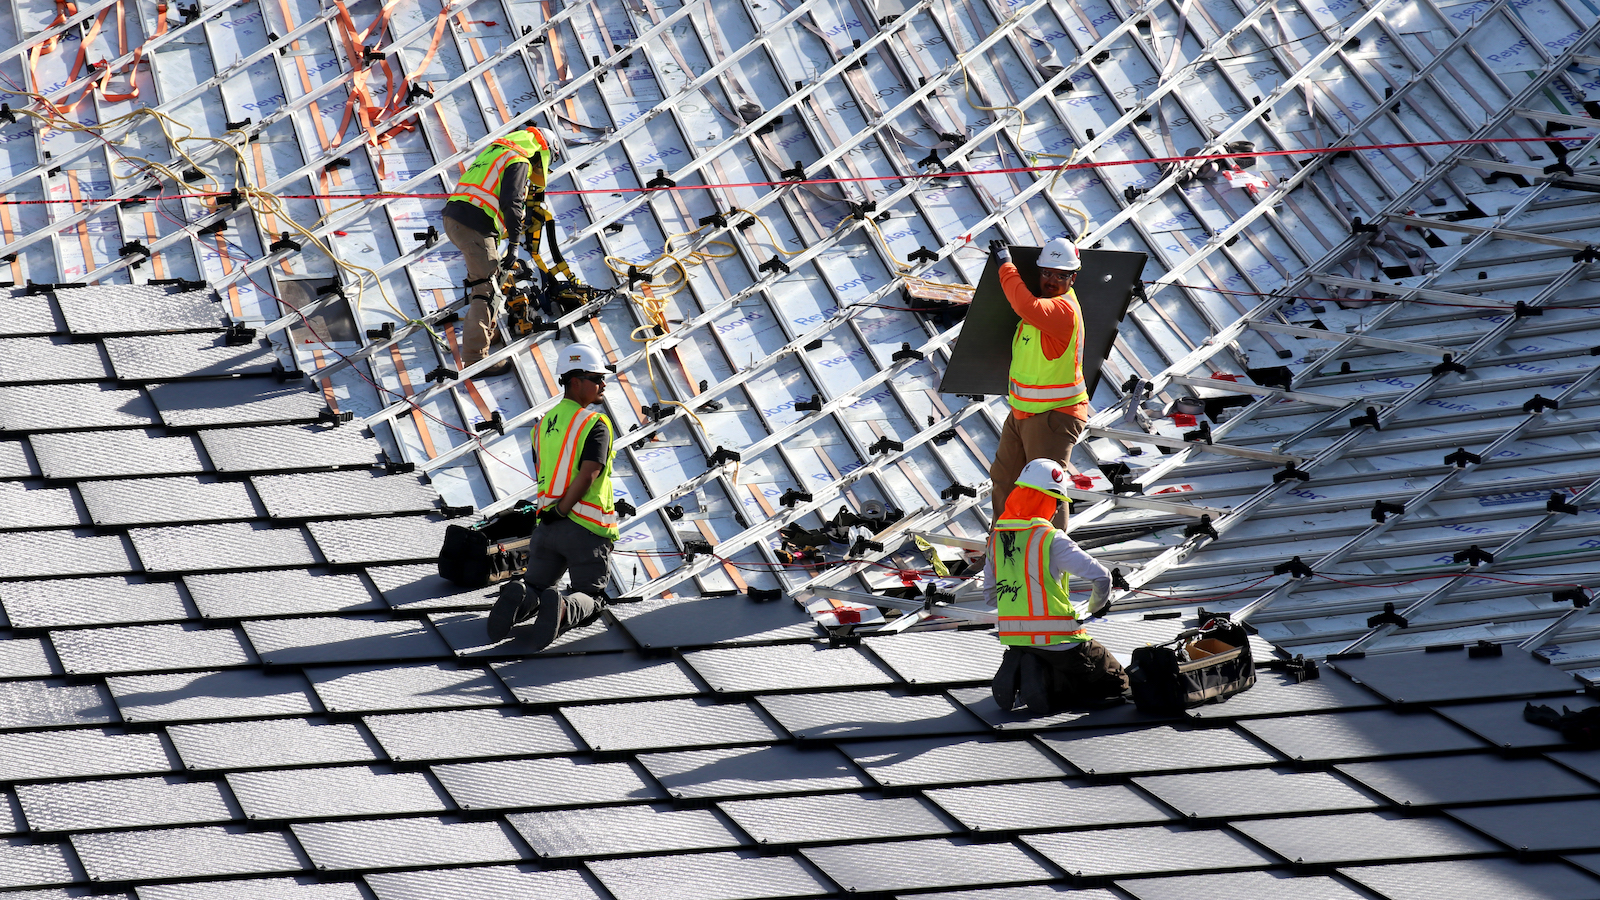 people in construction vests and hard hats kneel or stand on a roof patterned with overlapping diamond-shaped solar panels like scales